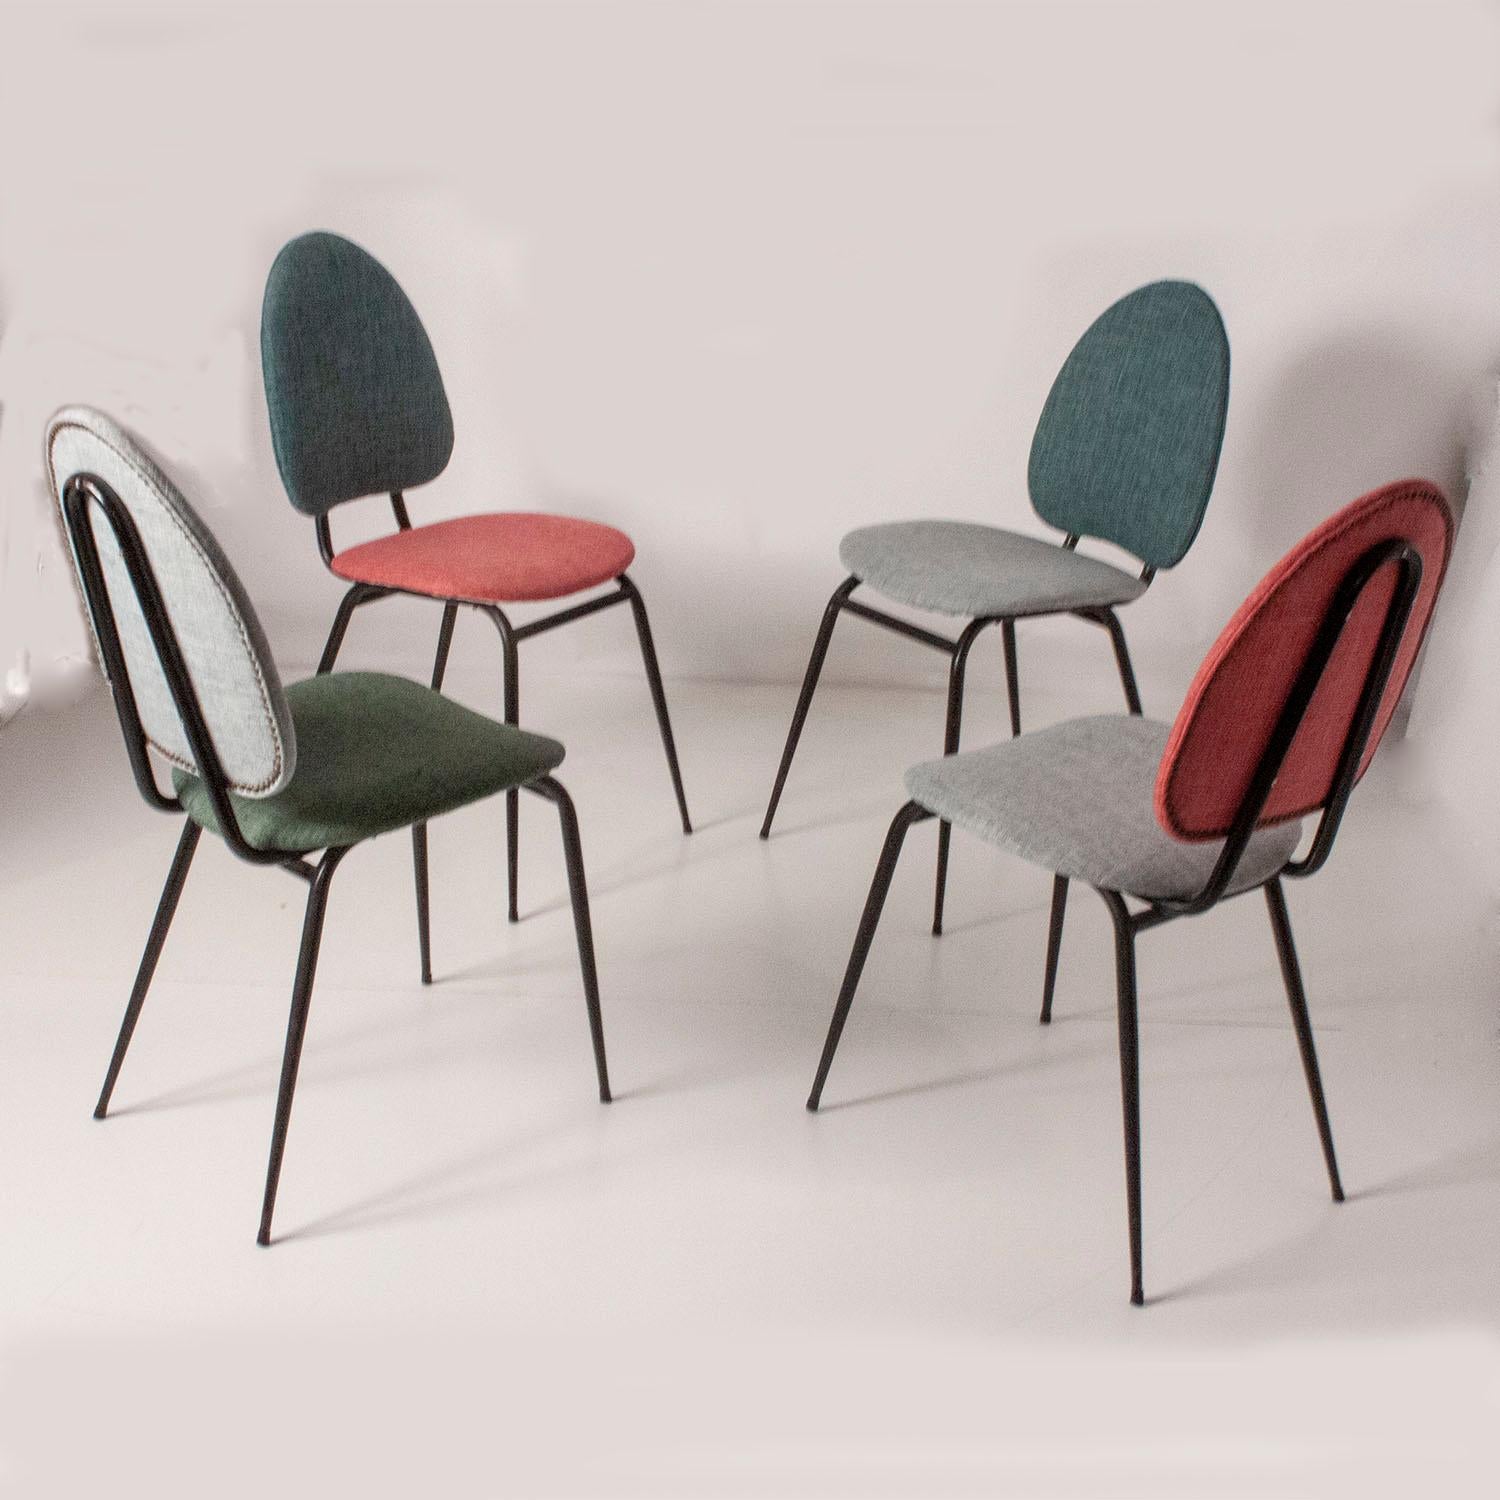 Fabric Set of Four Dining Chairs, in Various Colors, Spain, 1950s